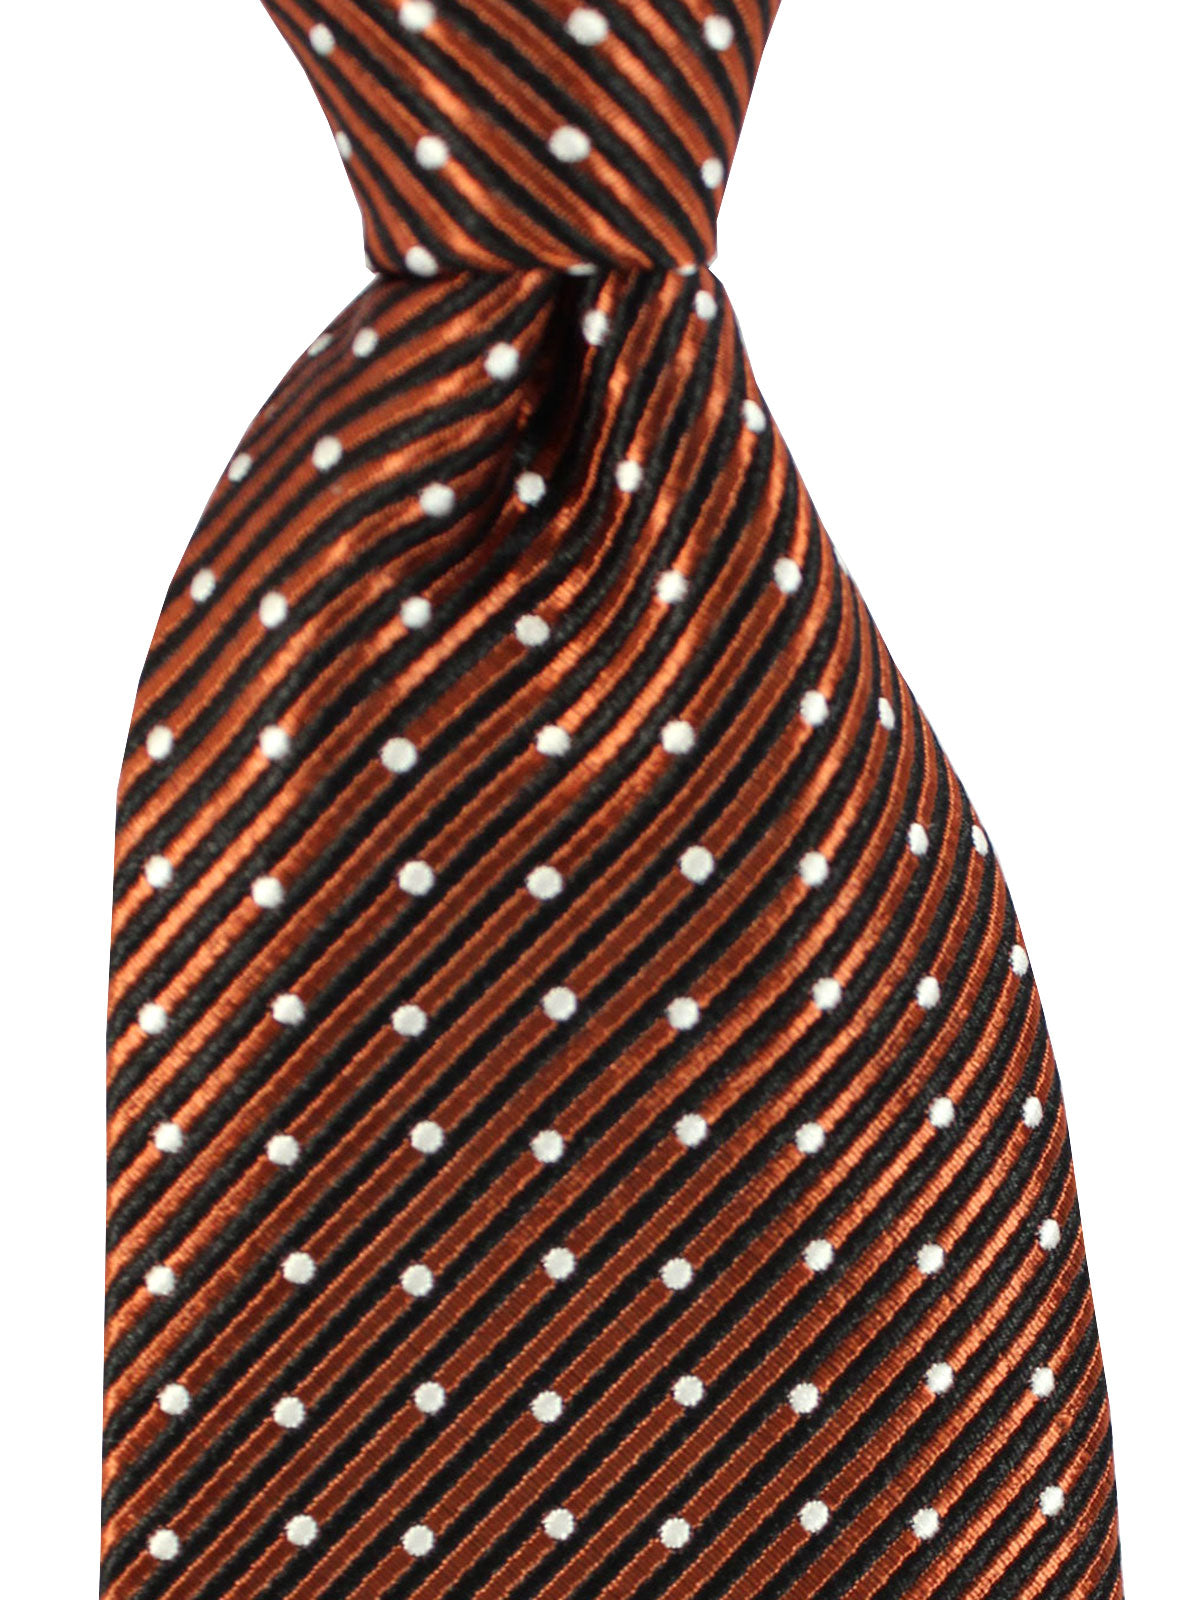 Tom Ford Tie Brown White Stripes Micro Dots Hand Made In Italy